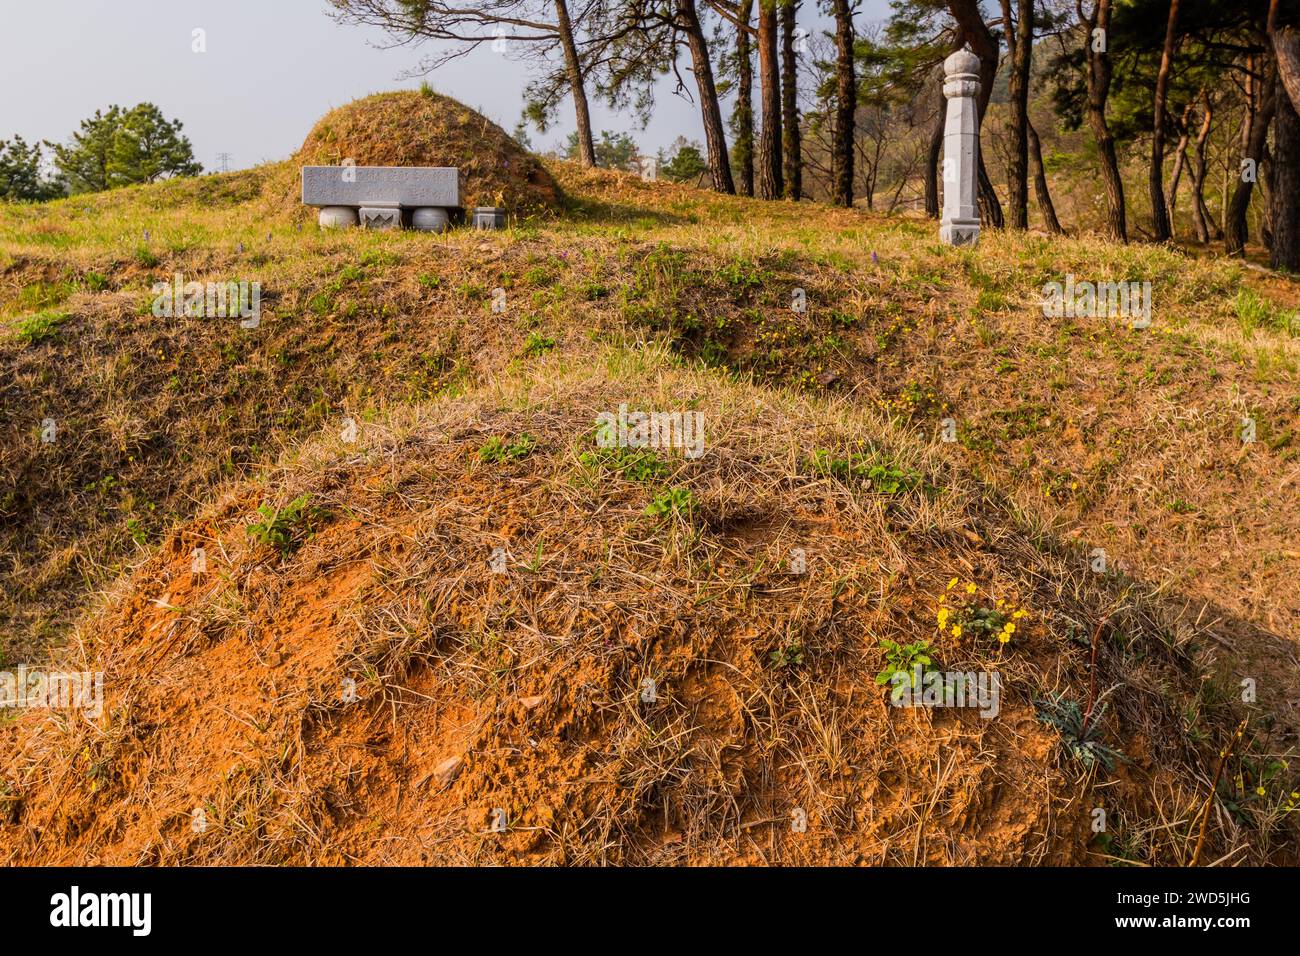 Closeup of unmarked burial mounds in rural wooded area next to stand of evergreen trees, South Korea, South Korea Stock Photo